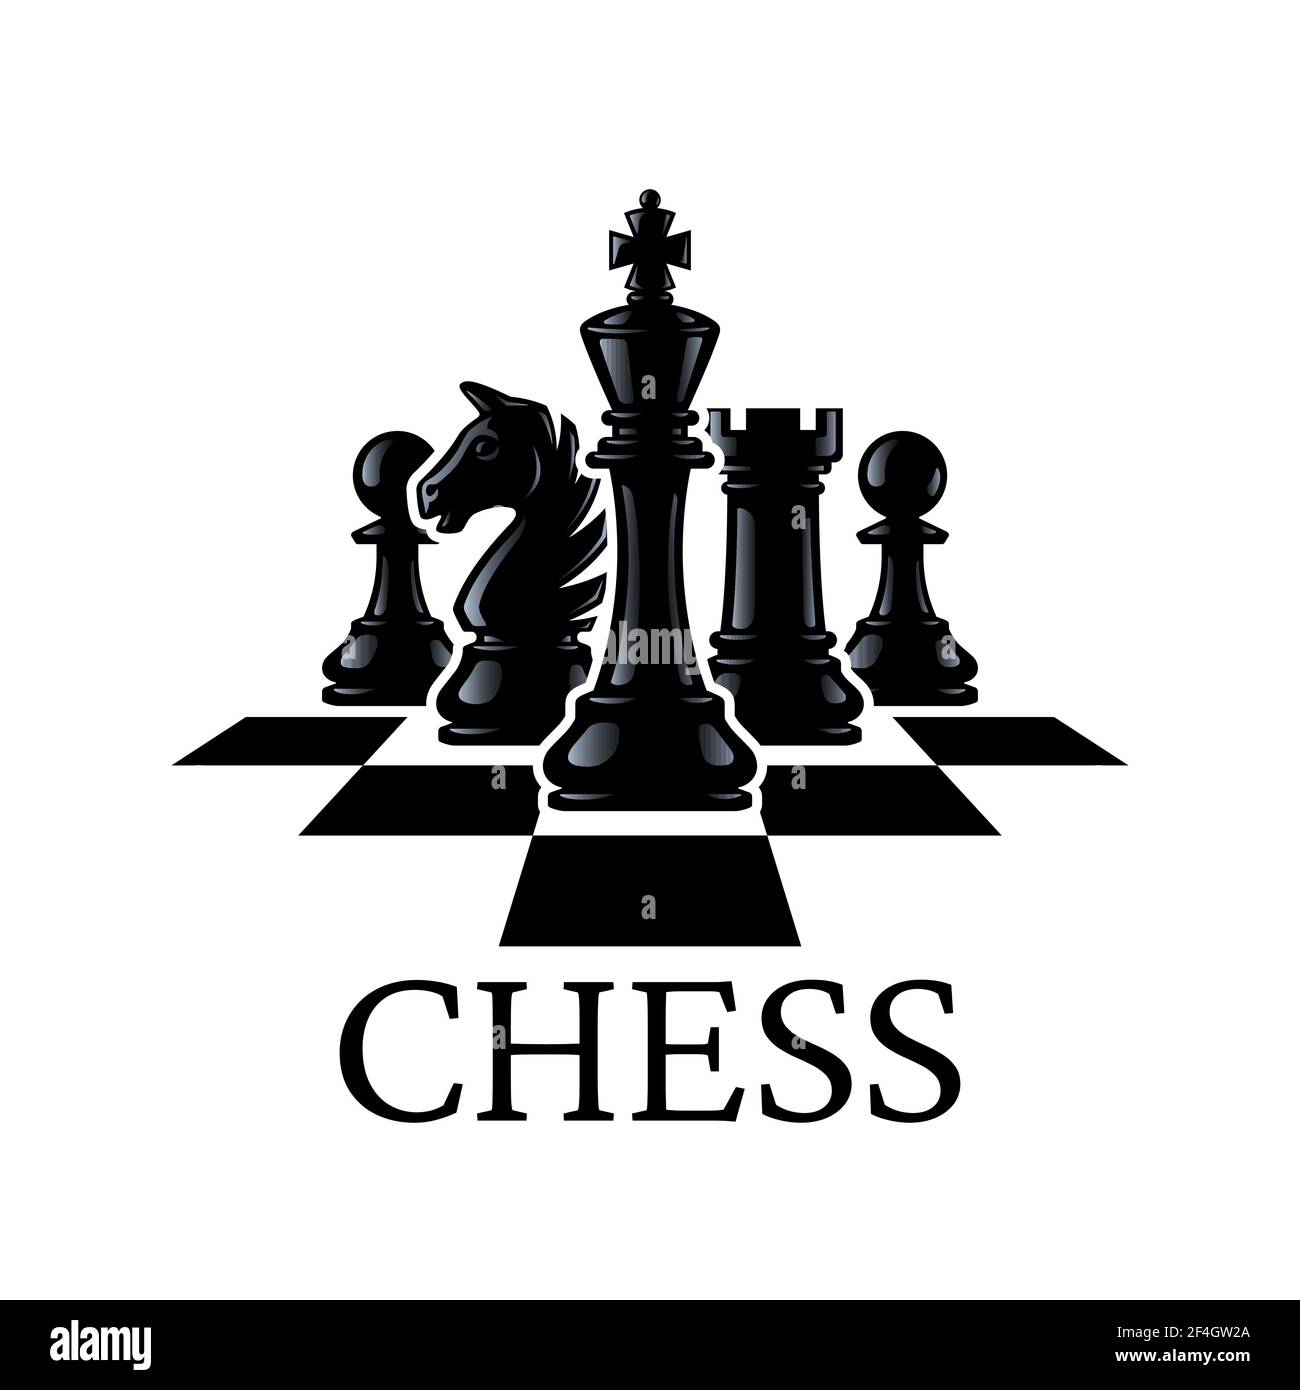 Download wallpapers chessboard, 3d metal chess, chess pieces, black and  white